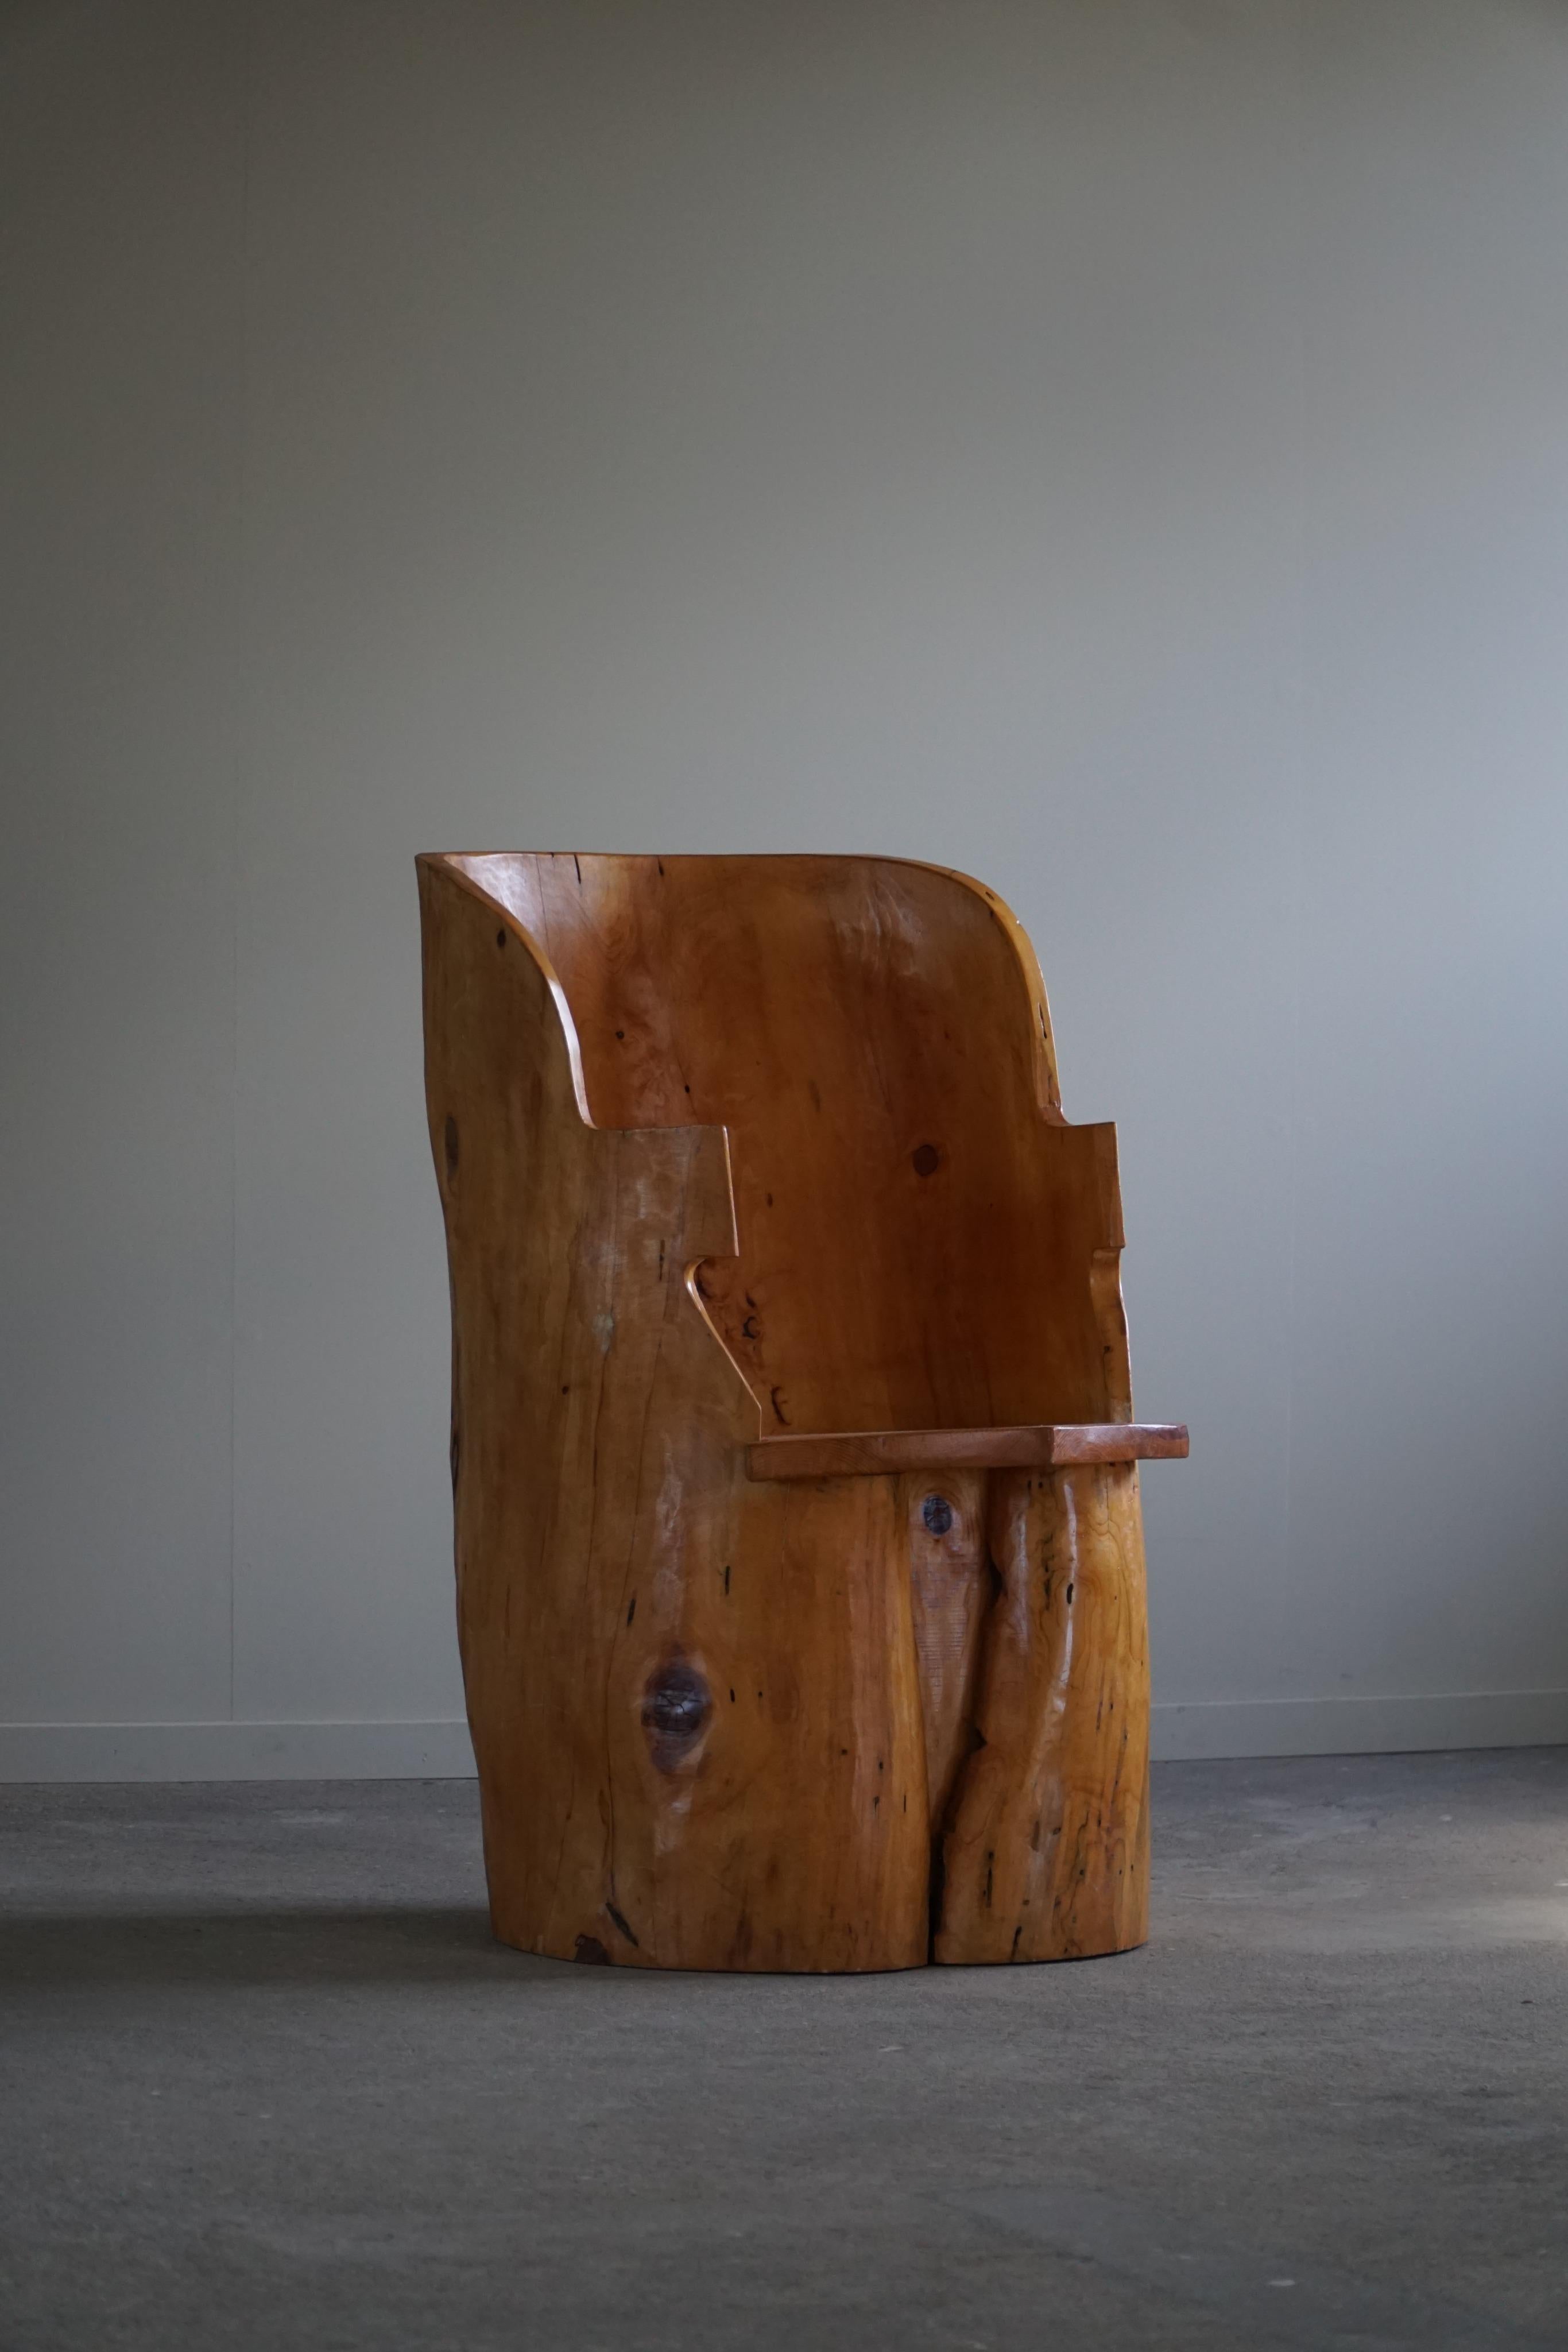 Stump Chair in Solid Birch by a Swedish Cabinetmaker, Wabi Sabi, 1950s For Sale 12